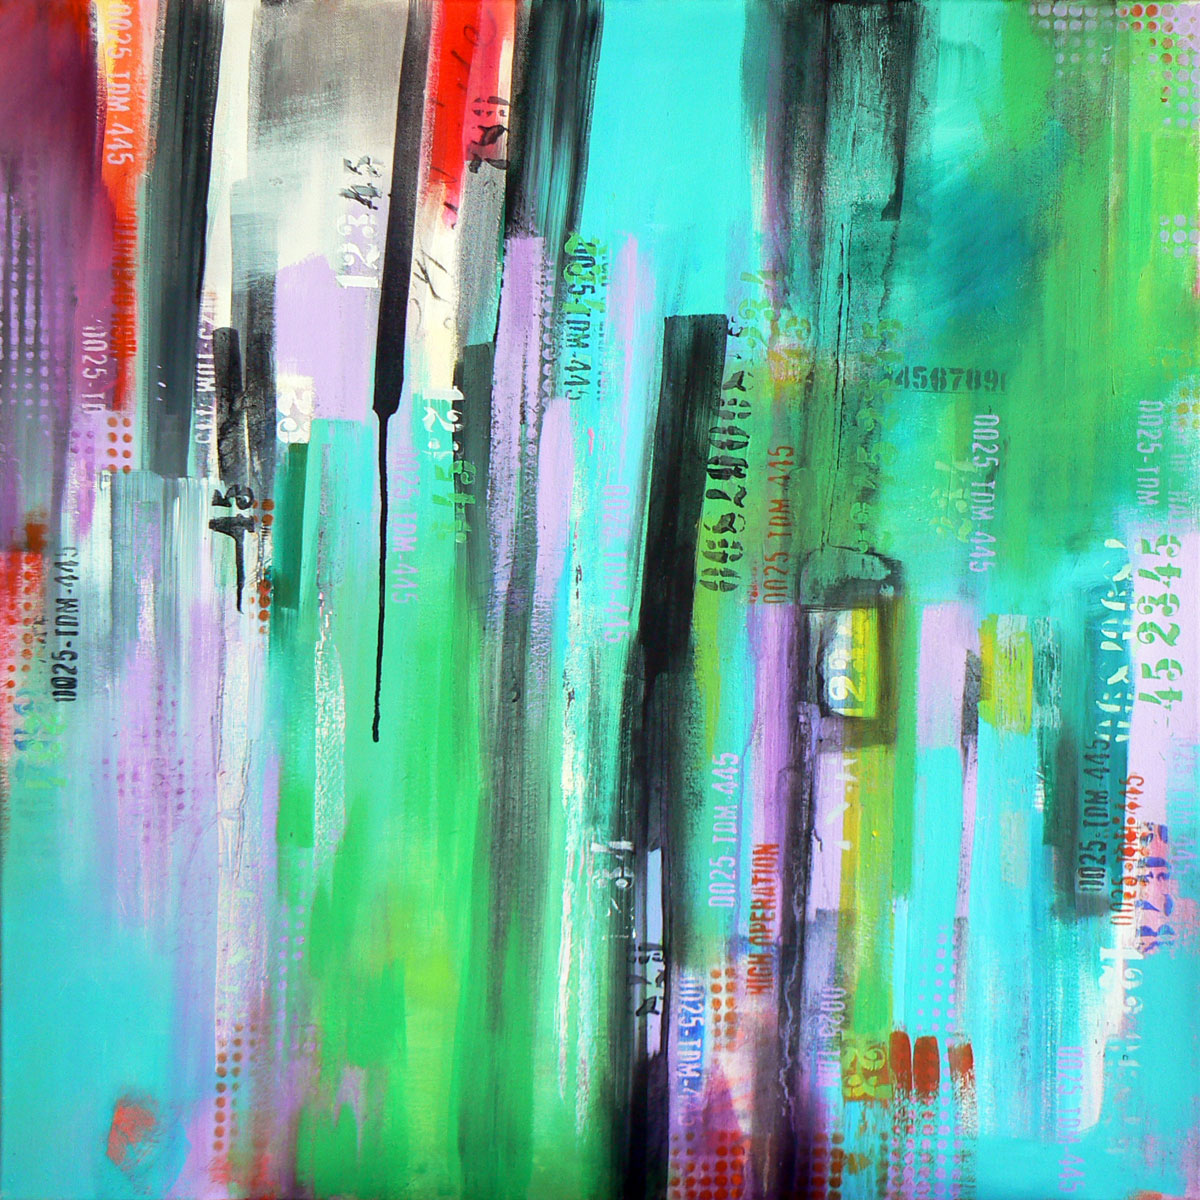 Calculating (contemporary urban abstract, typography artwork in blues and greens) (2018) Acrylic painting by Carolynne Coulson